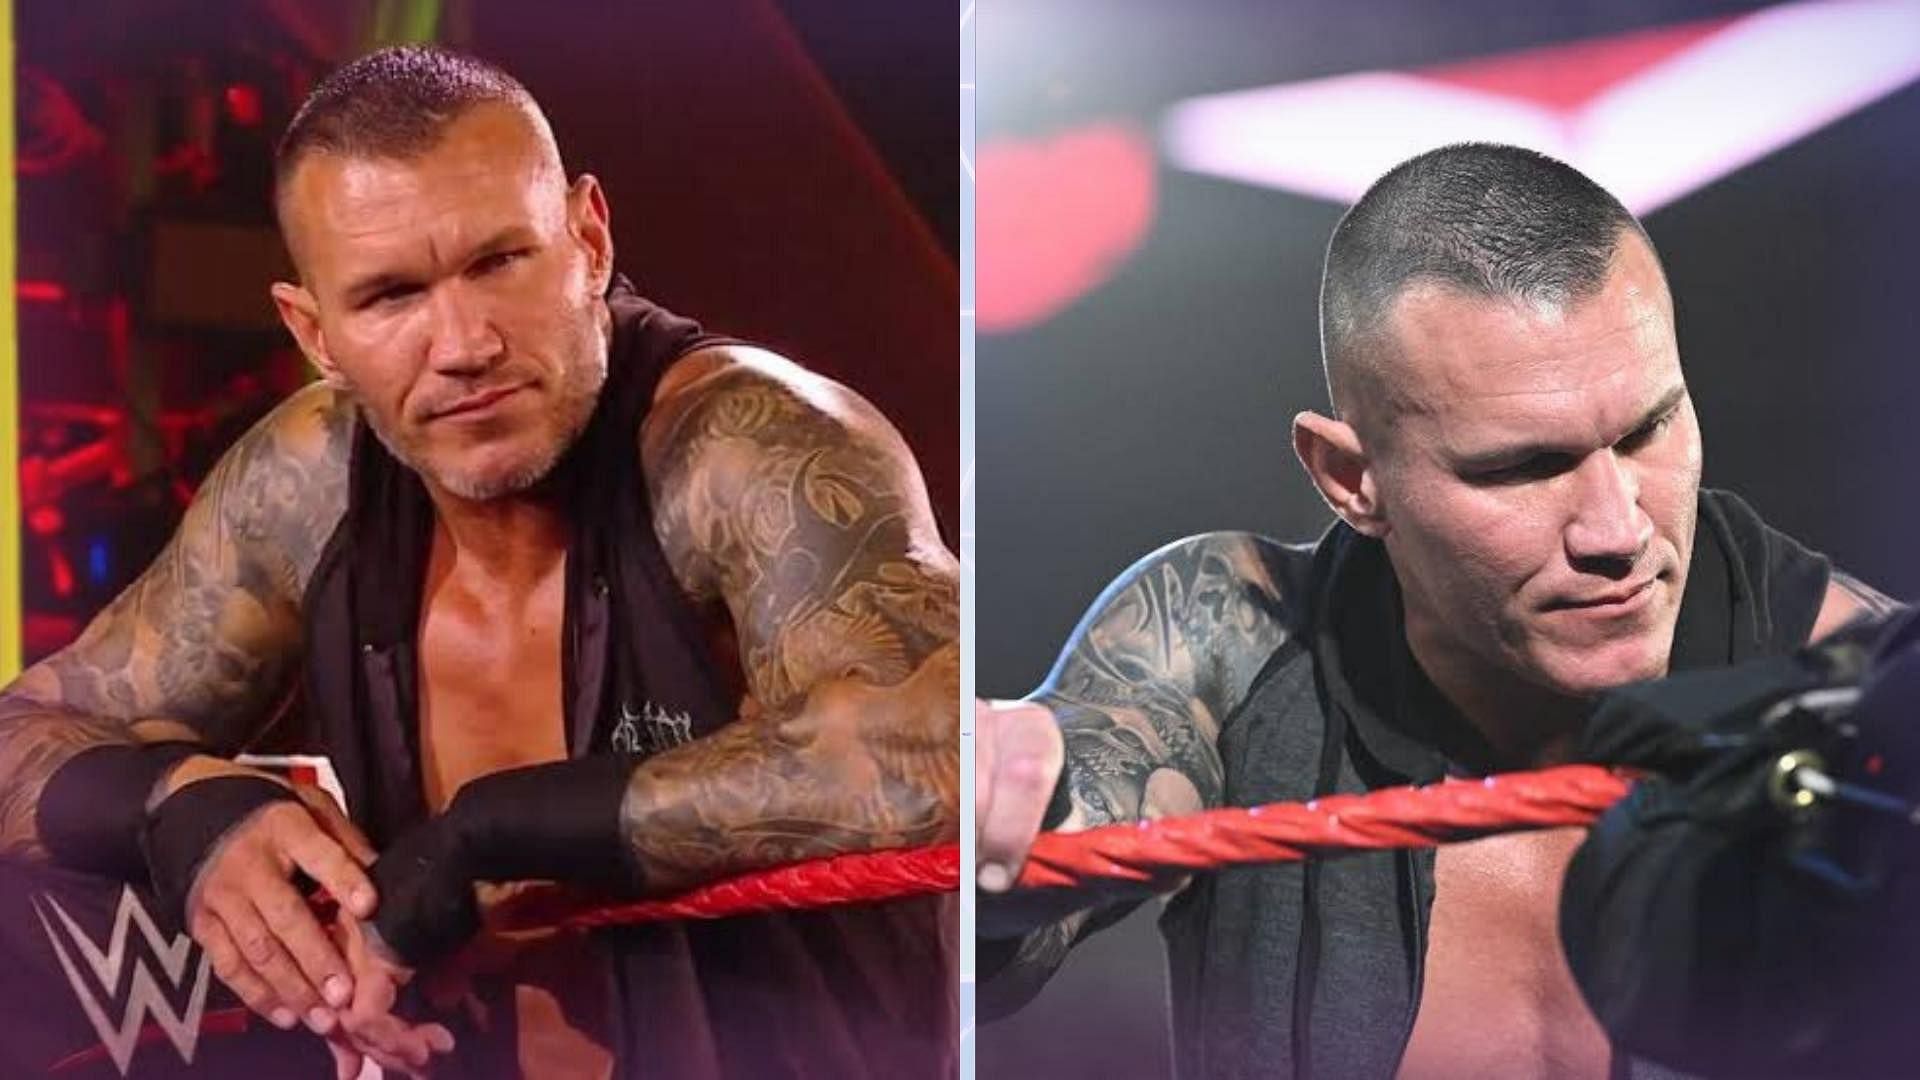 Its been 332 days since Randy Orton last WWE appearance